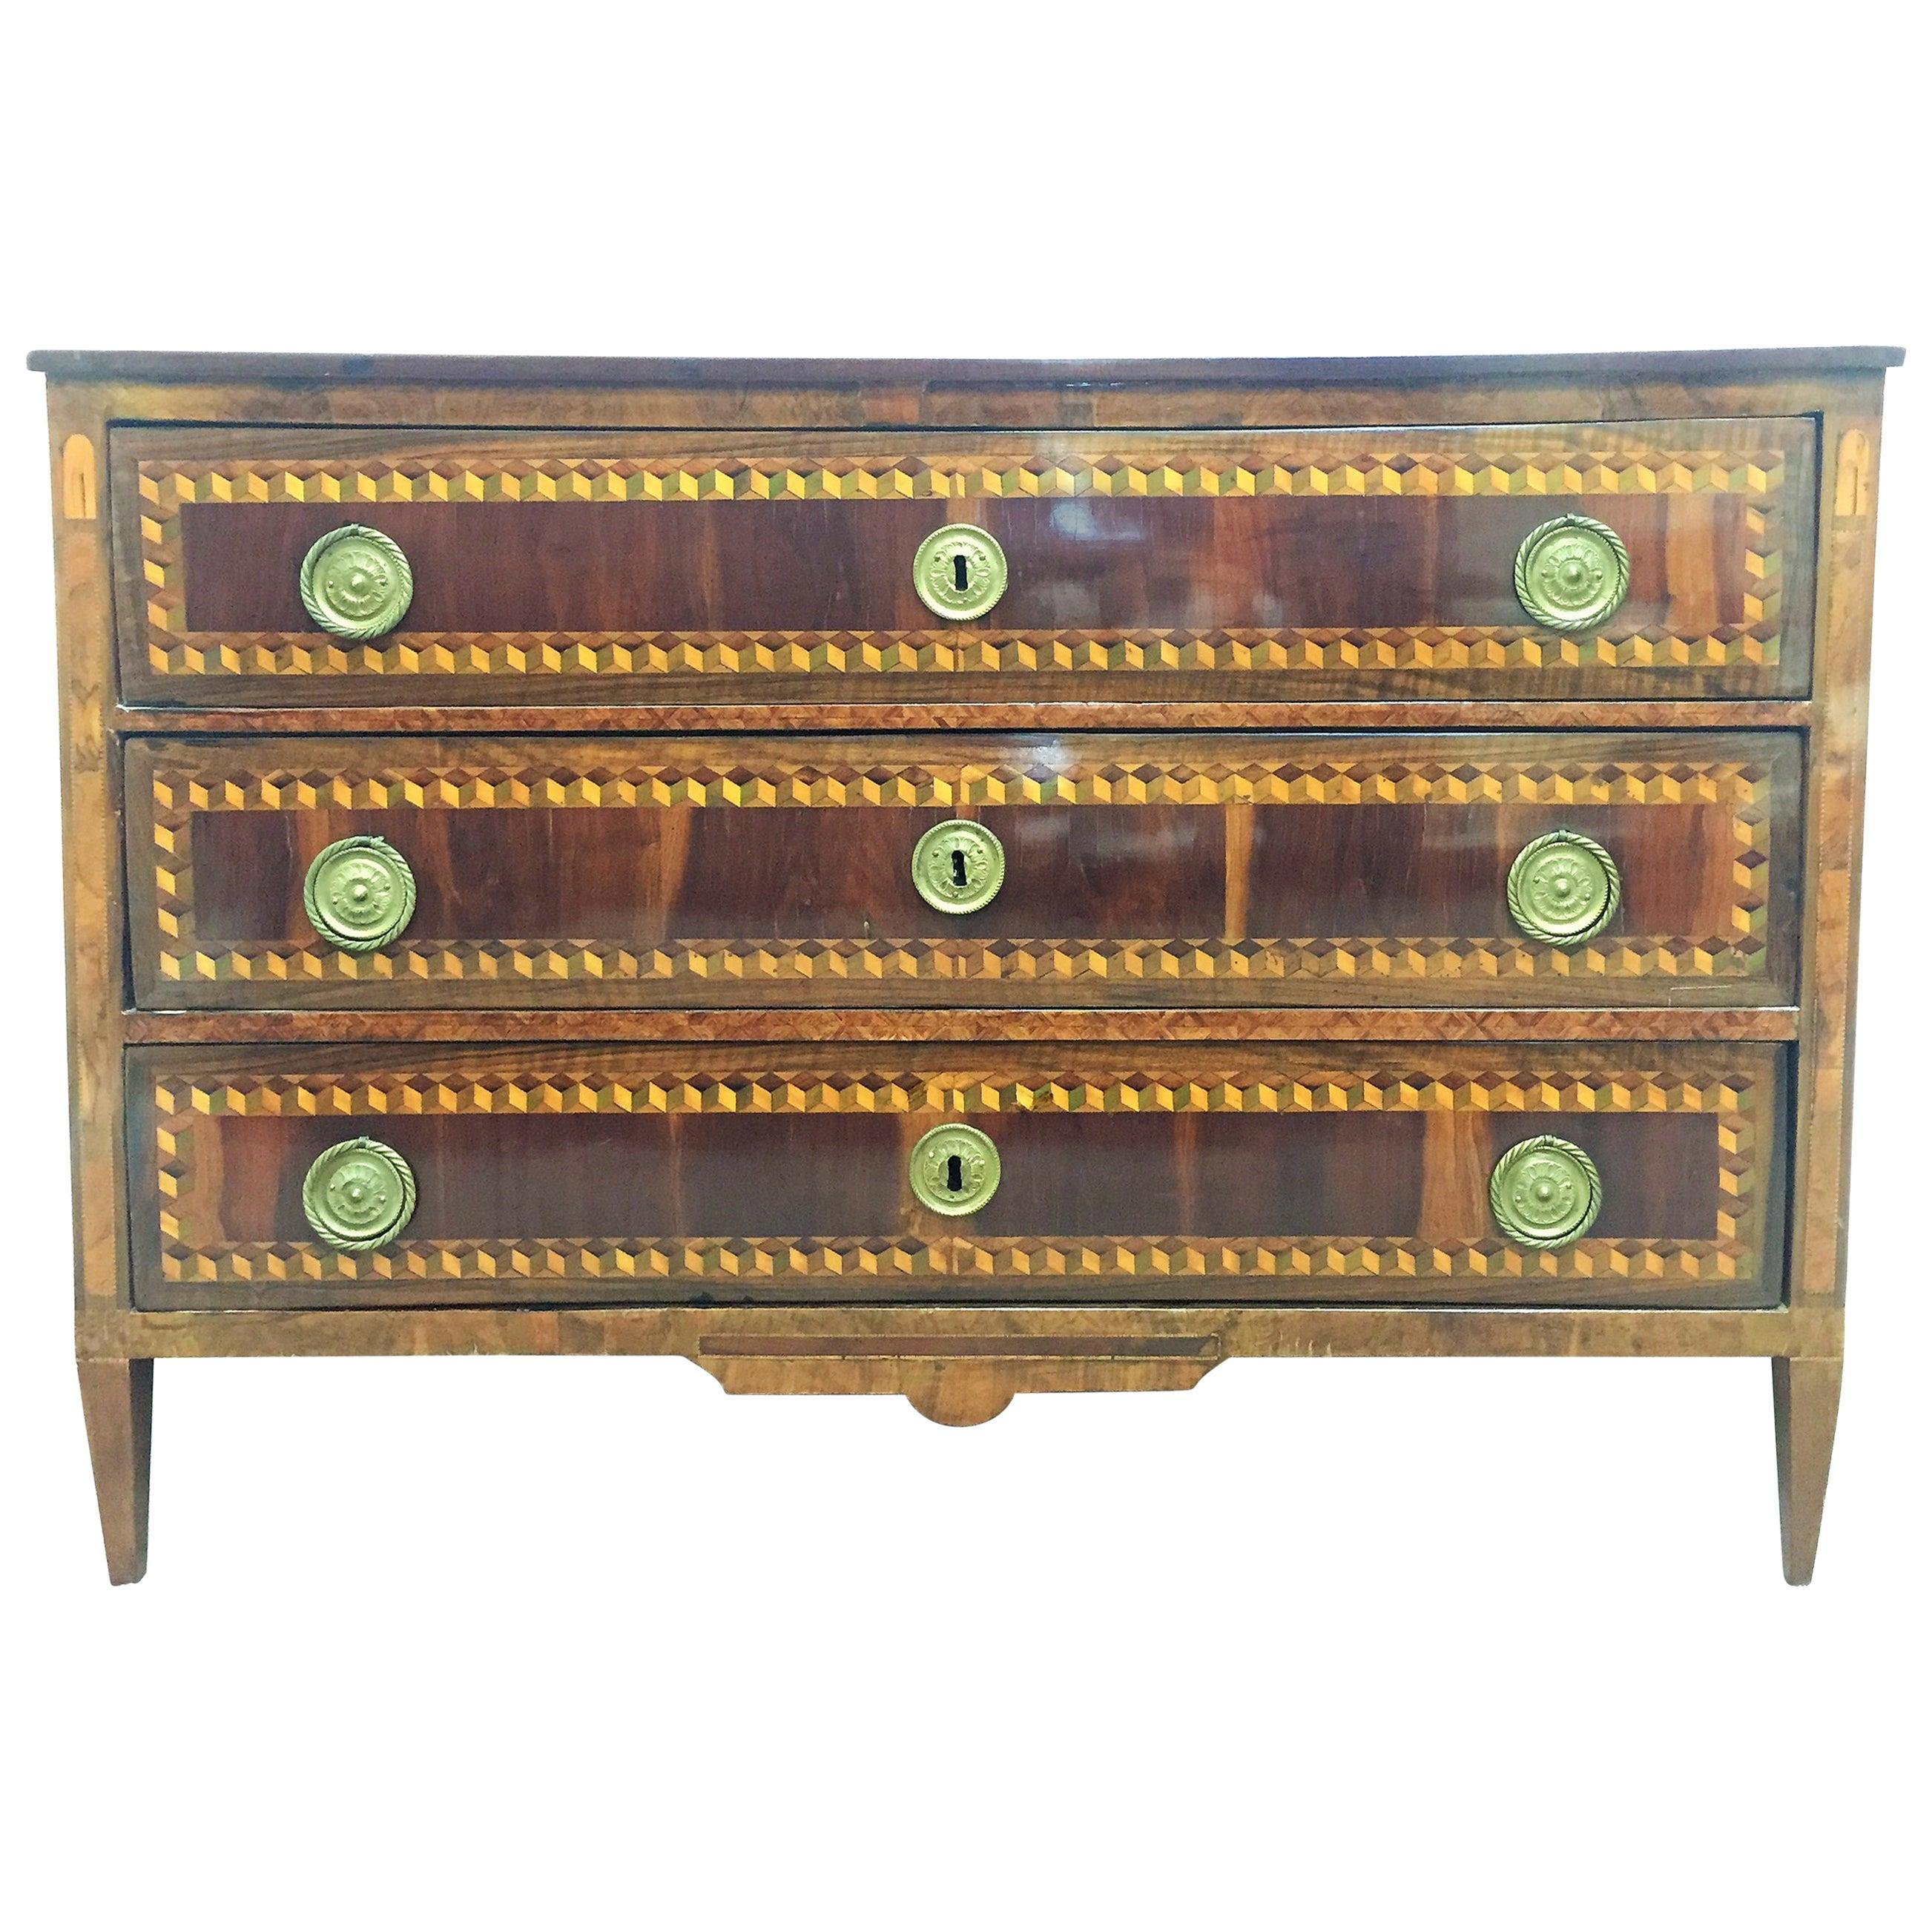 18th Century Louis XVI Marquetry Commode or Chest of Drawers with Tulipwood